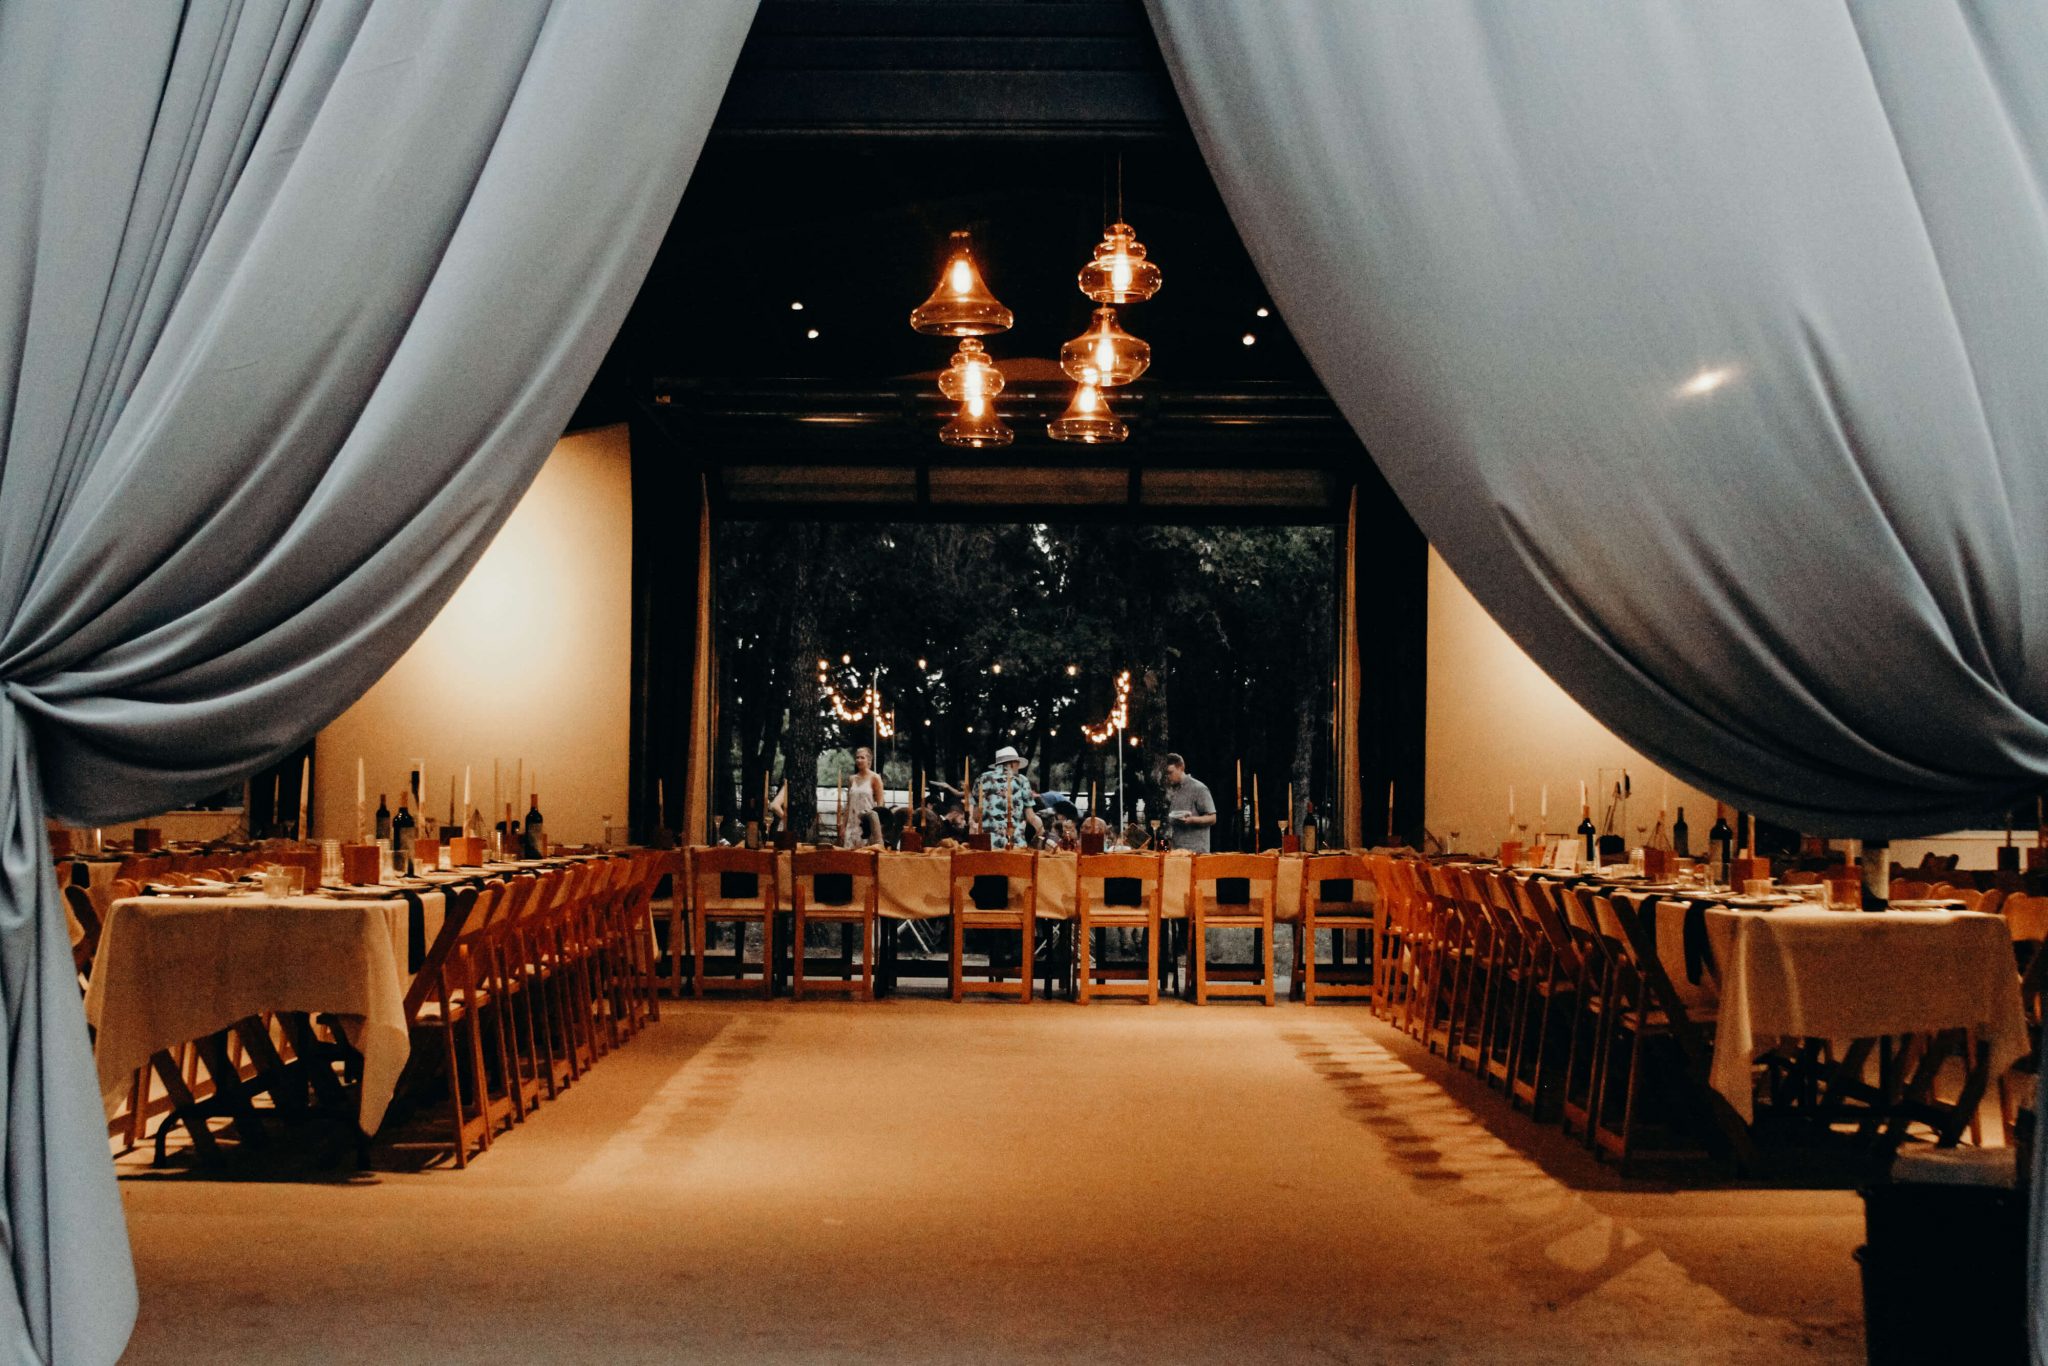 The Forge is an affordable barn wedding venue located near DFW, Texas.